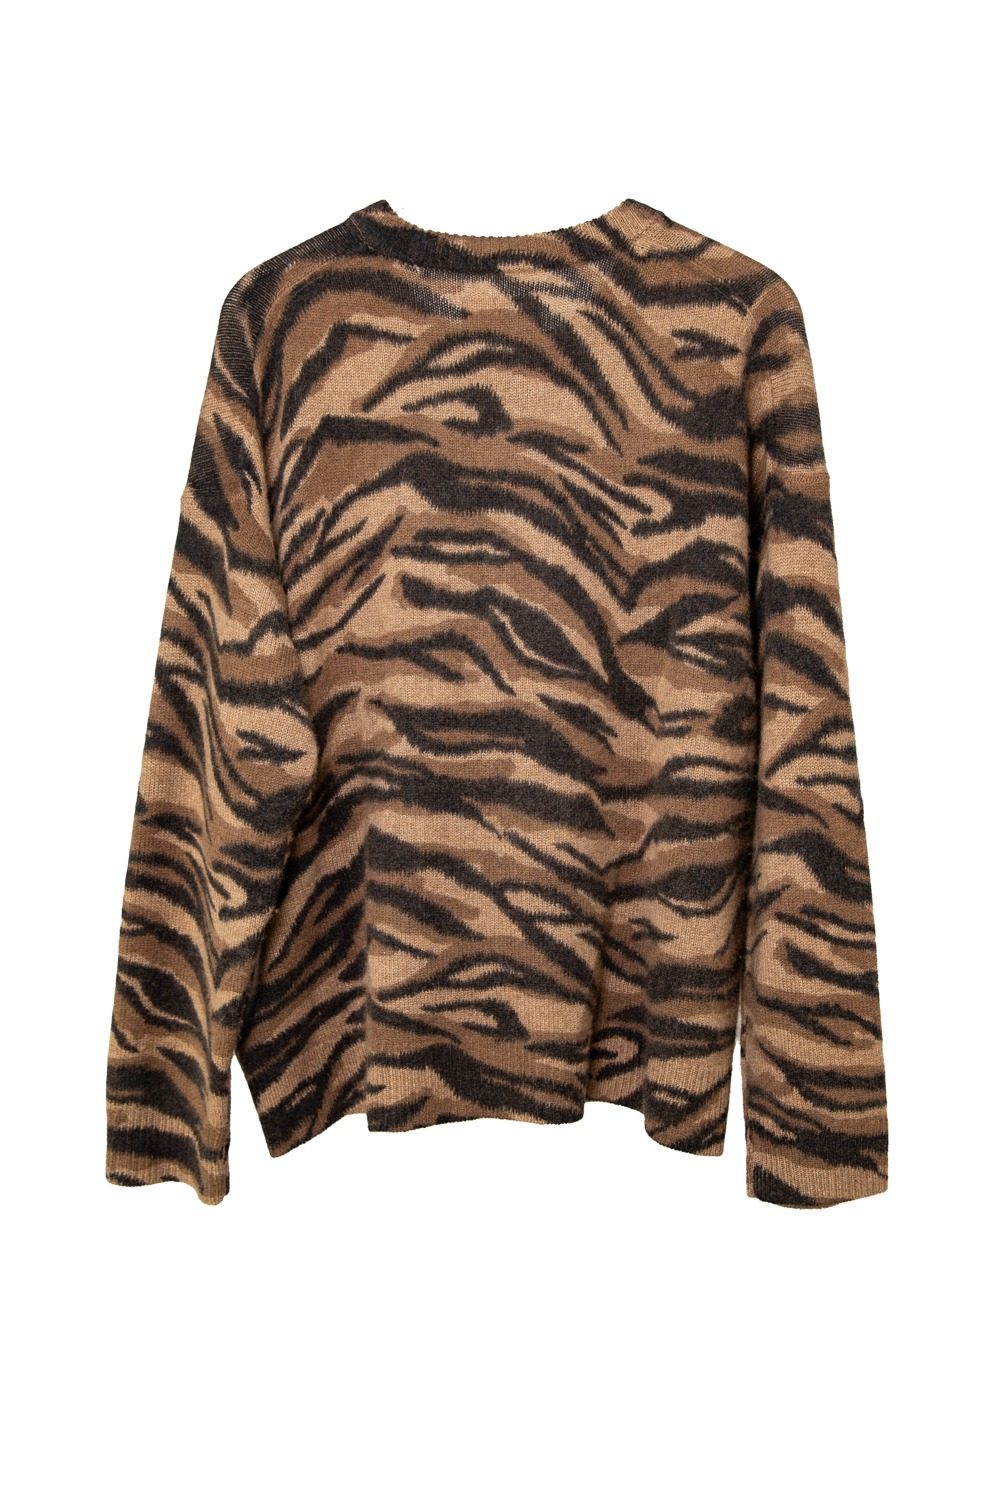 Thumbnail of http://Zadig%20&%20Voltaire%20Markus%20WS%20Tiger%20Print%20Strickpullover